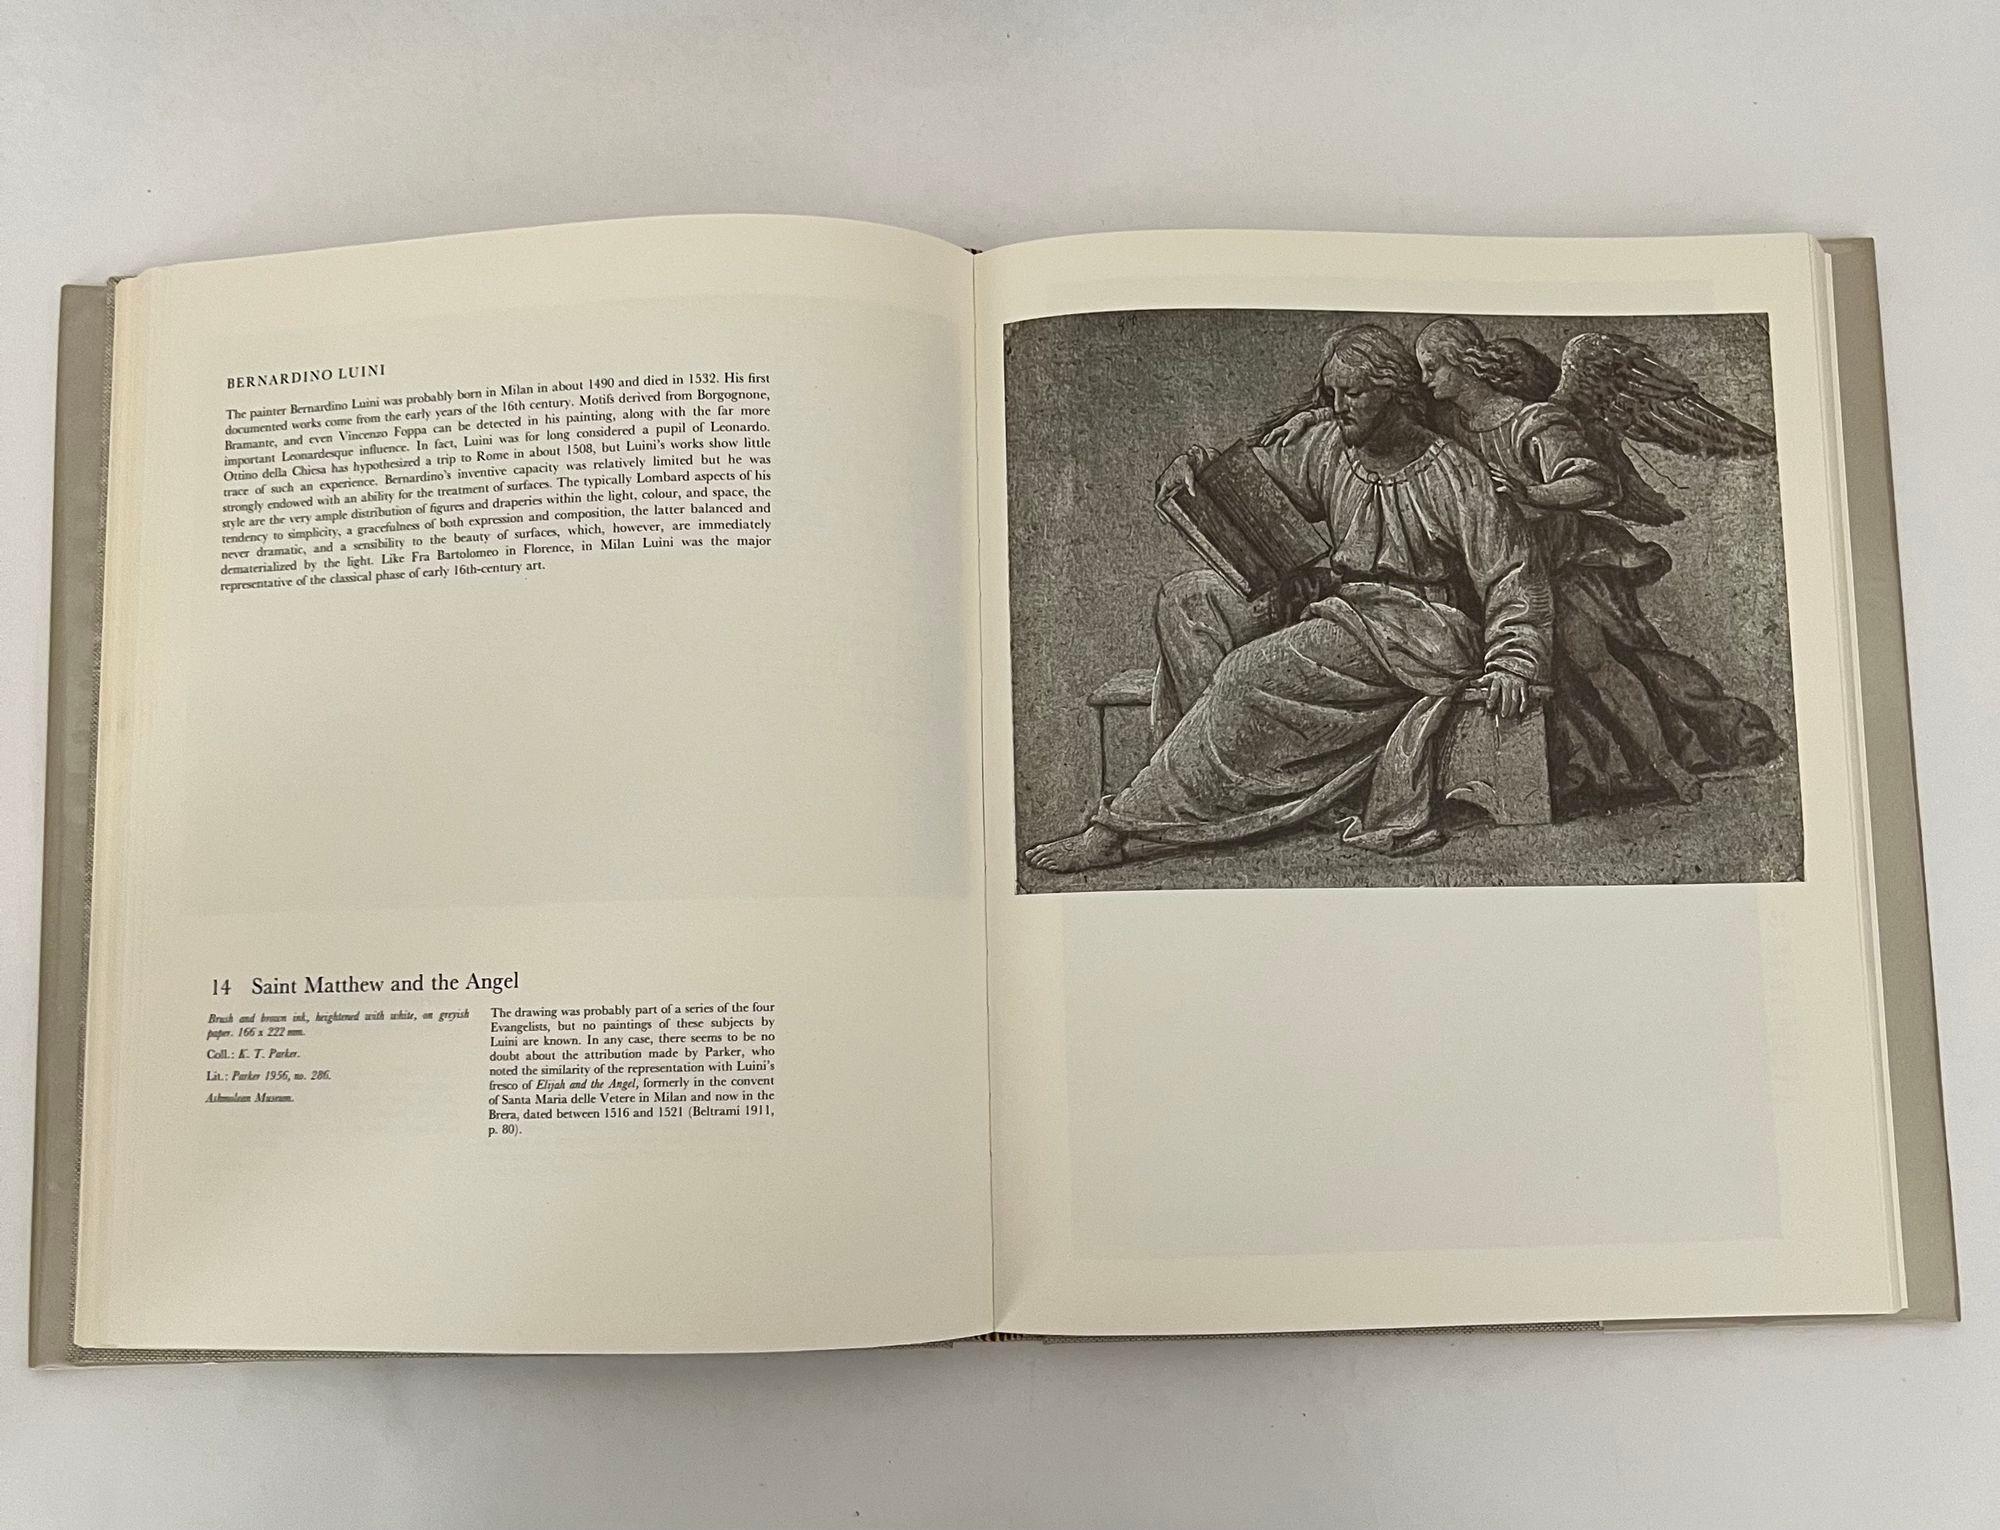 Italian Drawings In Oxford by Terisio Pignatti, First English Publication, 1977 For Sale 2